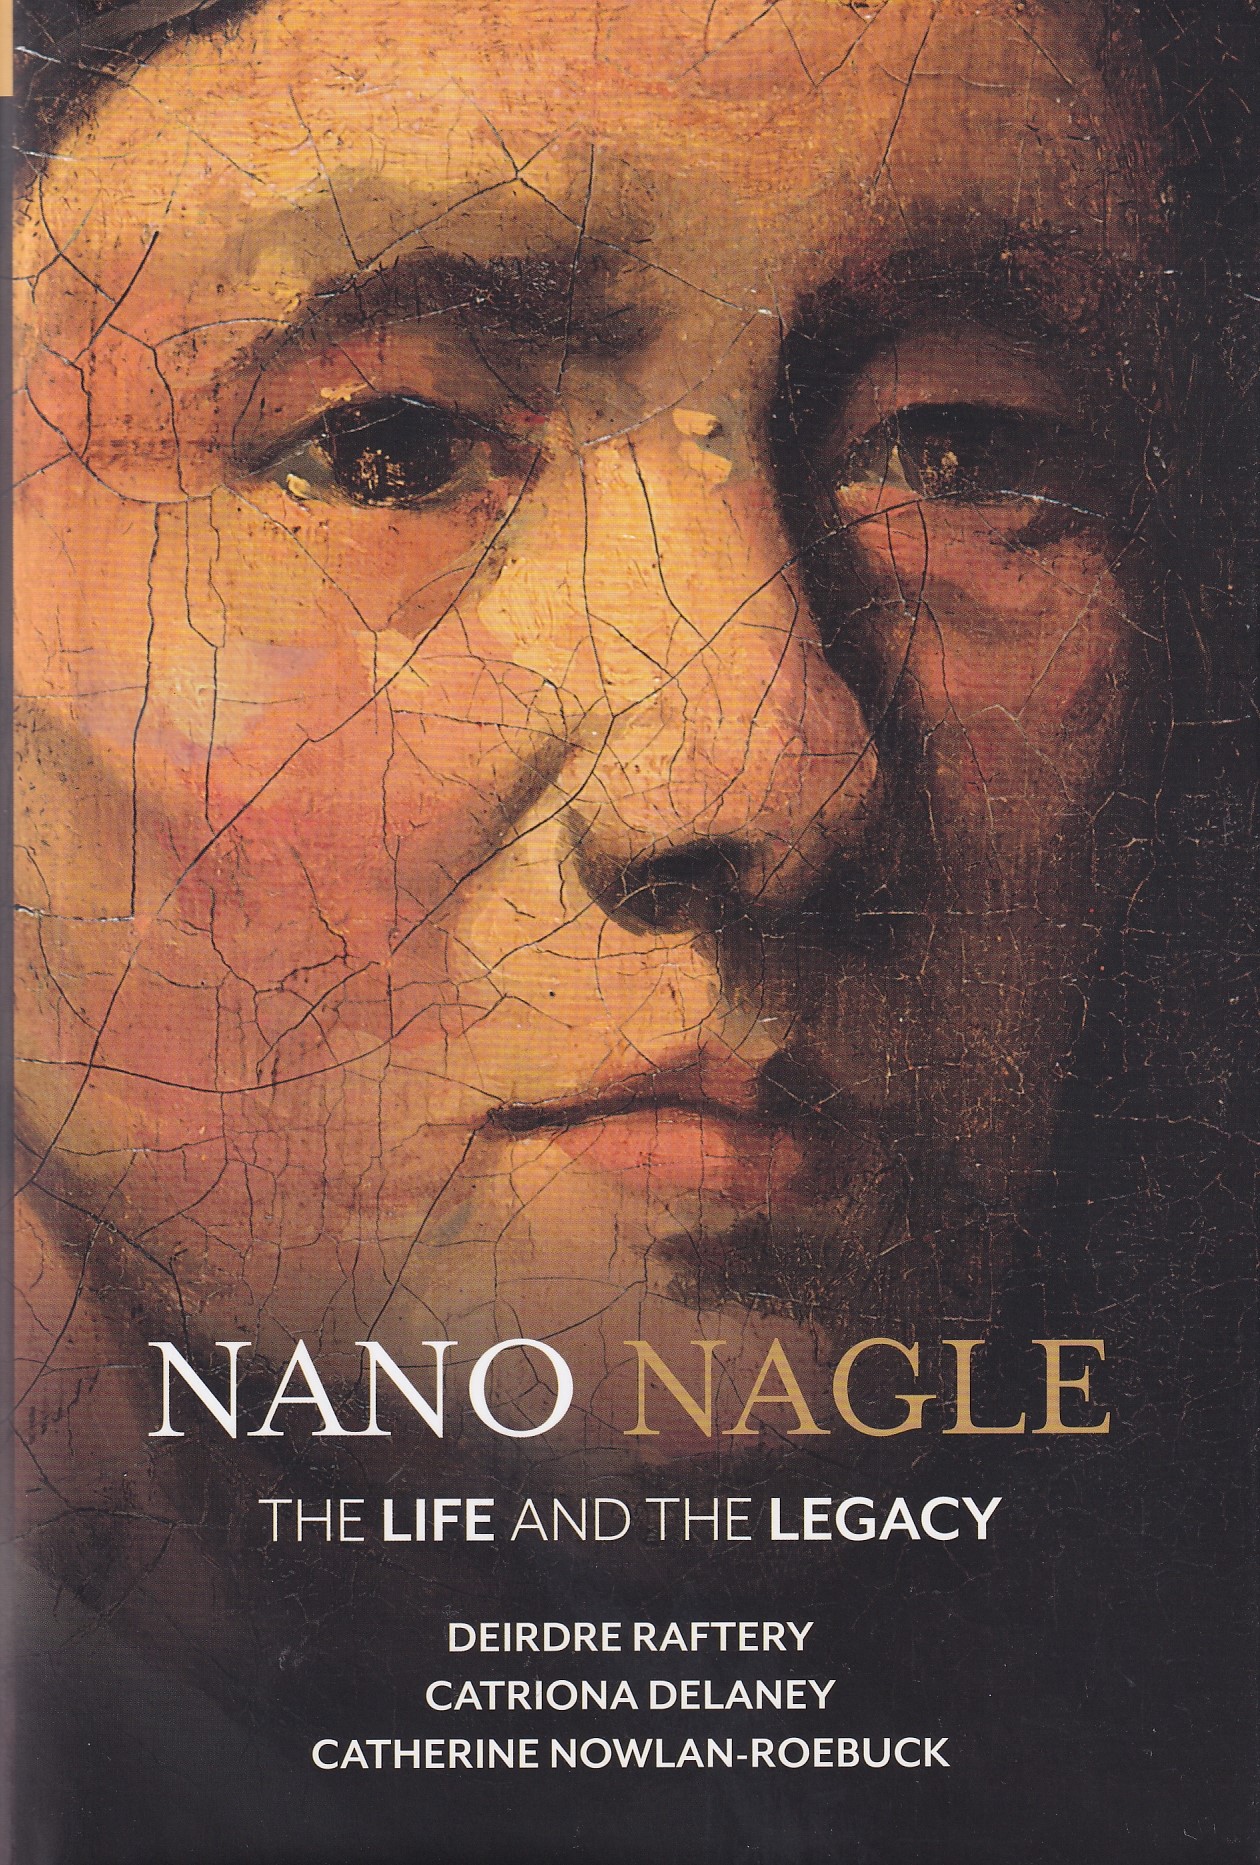 Nano Nagle: The Life and the Legacy | Raftery, Deirdre; Delaney, Catriona; Nowlan-Roebuck, Catherine | Charlie Byrne's